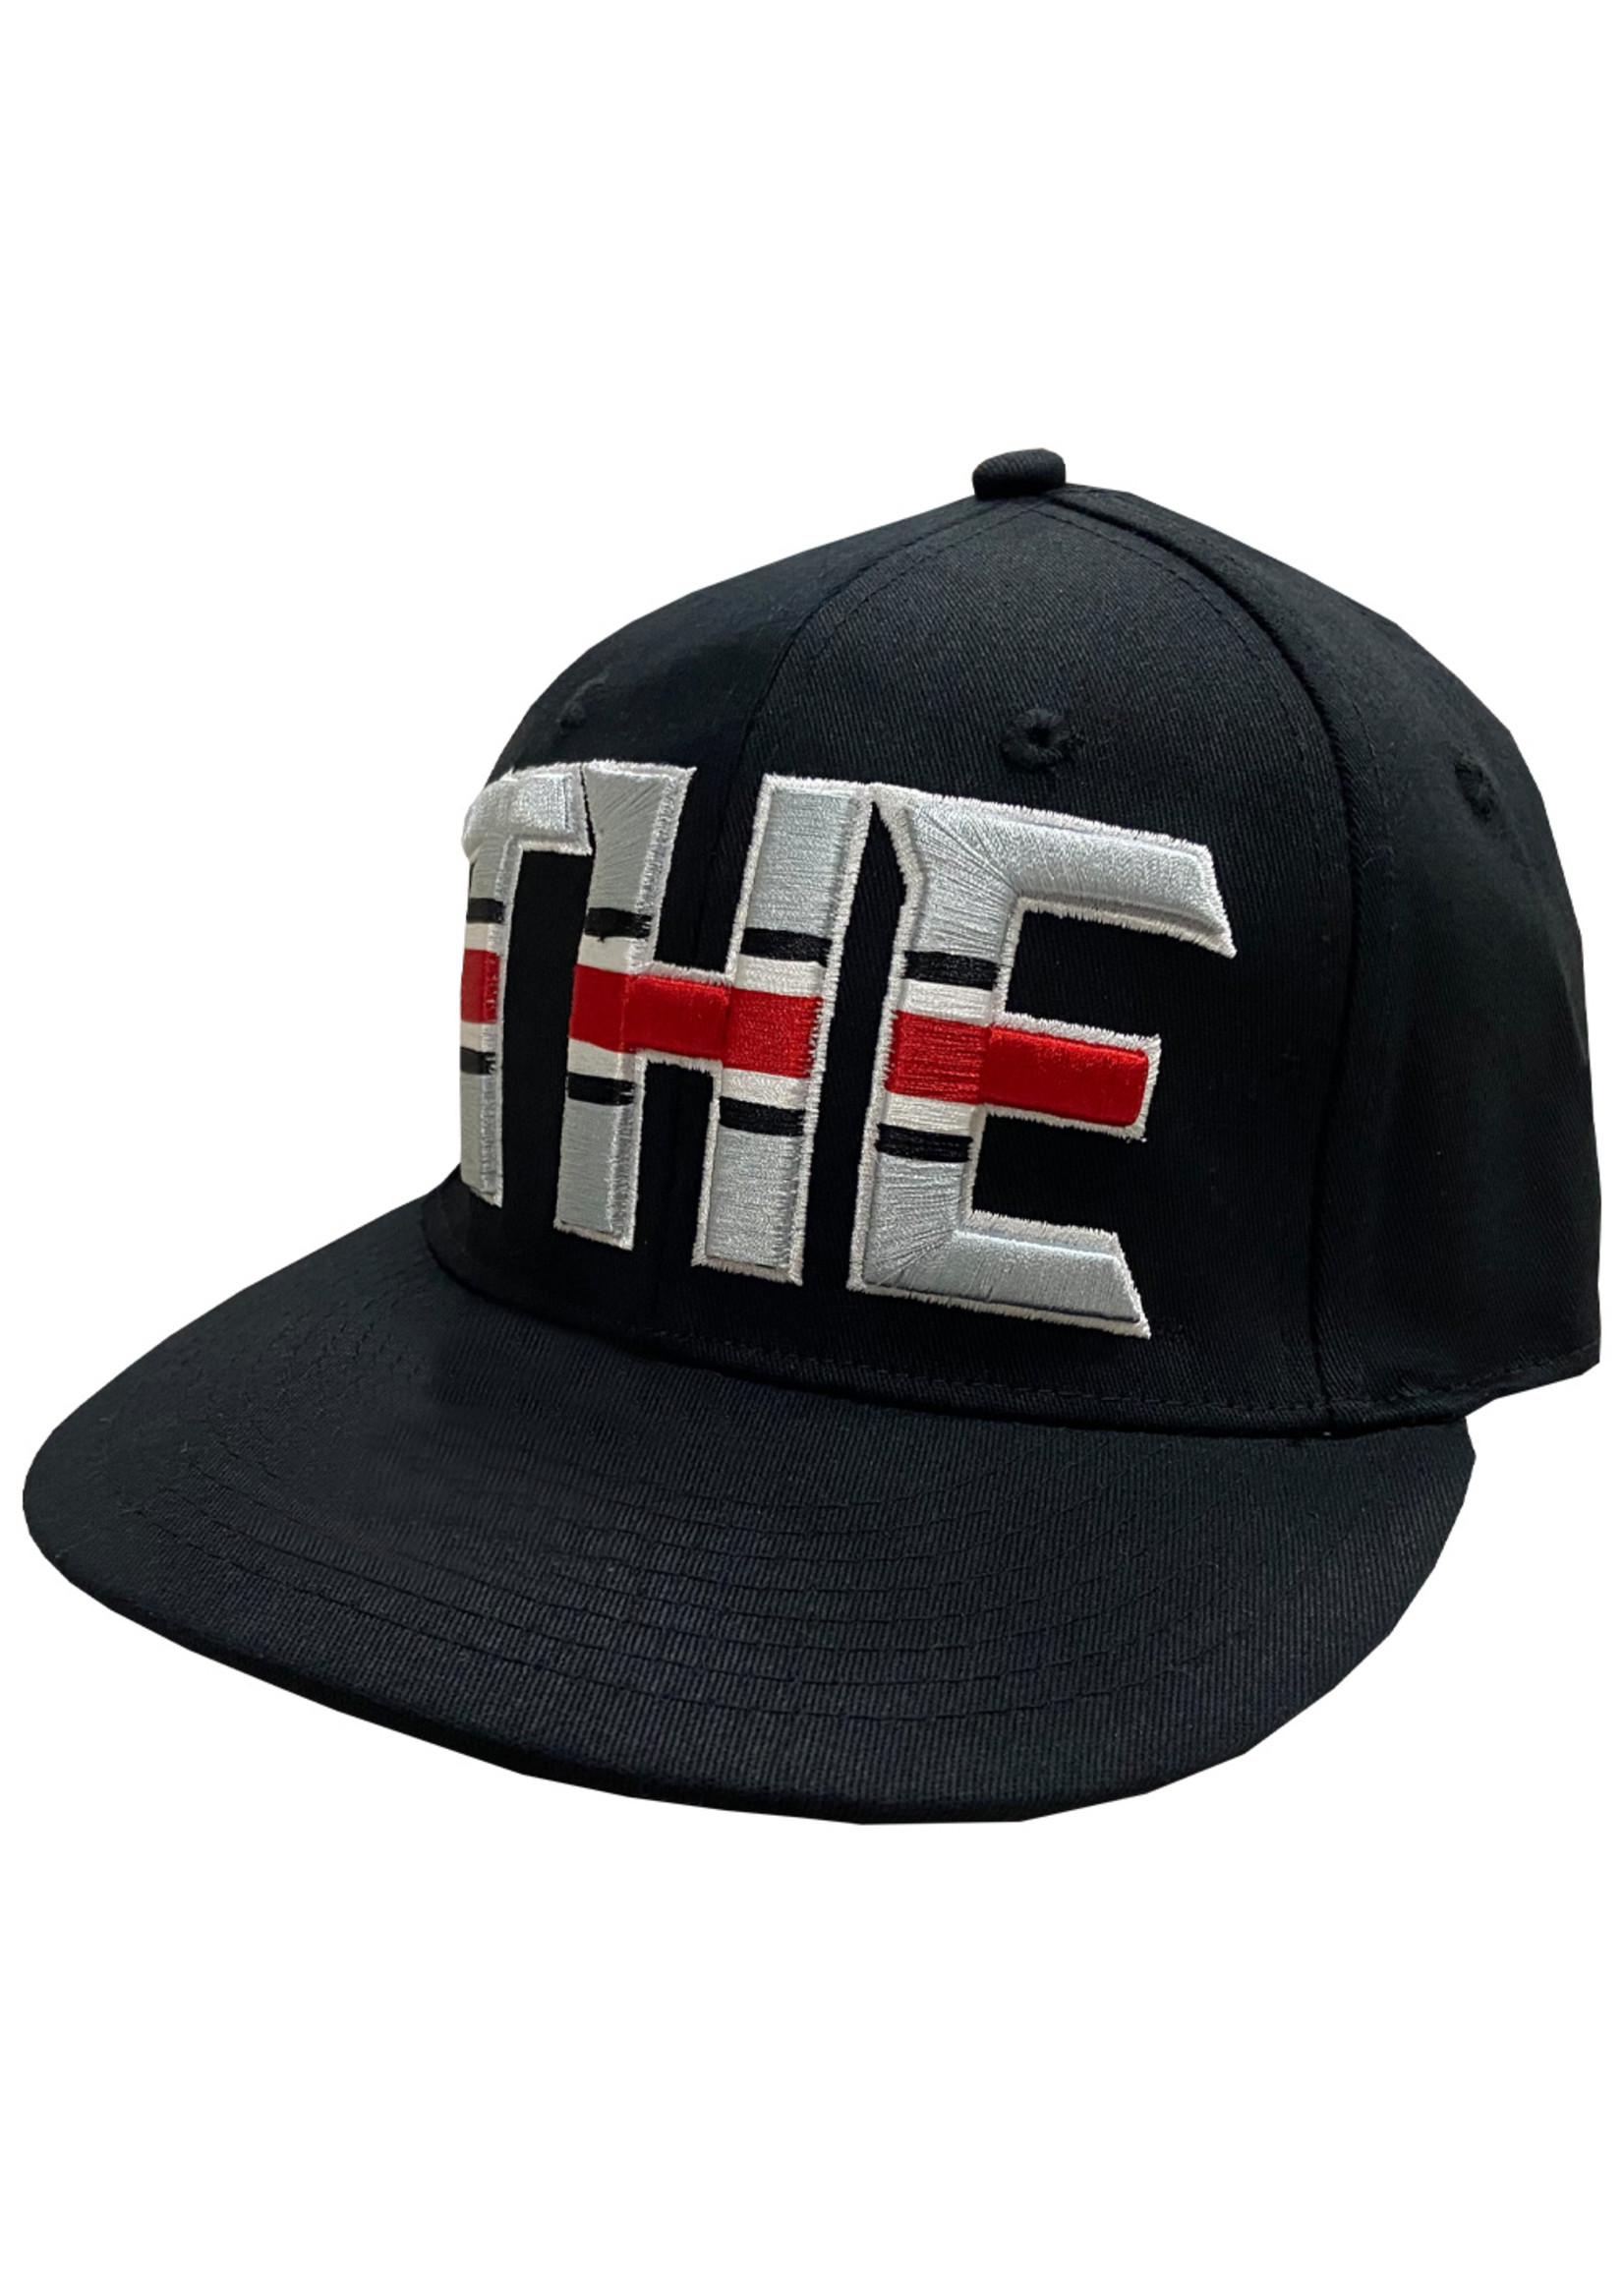 Ohio State Buckeyes "THE" Flex Fit Hat